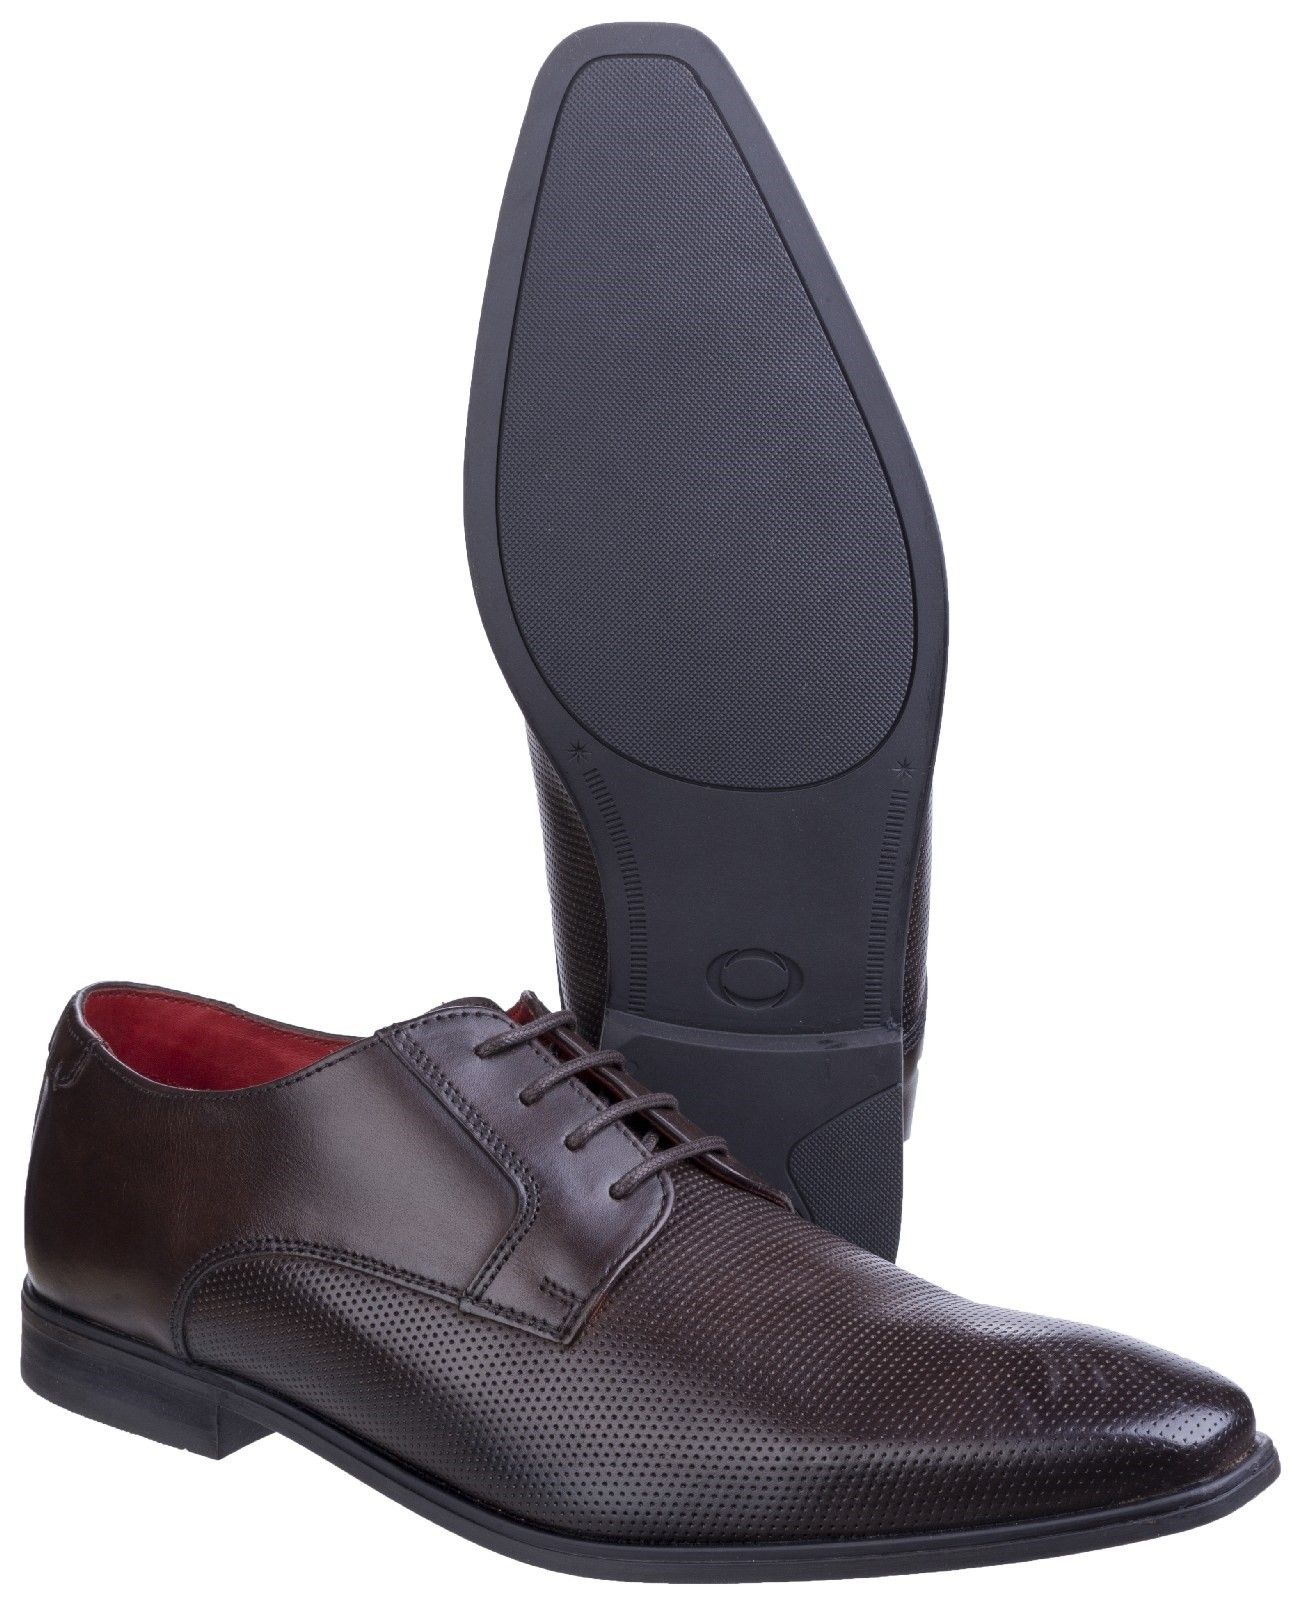 To be worn with confidence. Our Charles Derby shoe style, boasting dimpled detailing on the leather uppers is a Smart/Casual wardrobe essential. Base London mens formal lace up shoe.. 
Leather uppers boasting dimpled detailing.. 
Waxy leather uppers.. 
Featured in the Base London Fashionista Range..